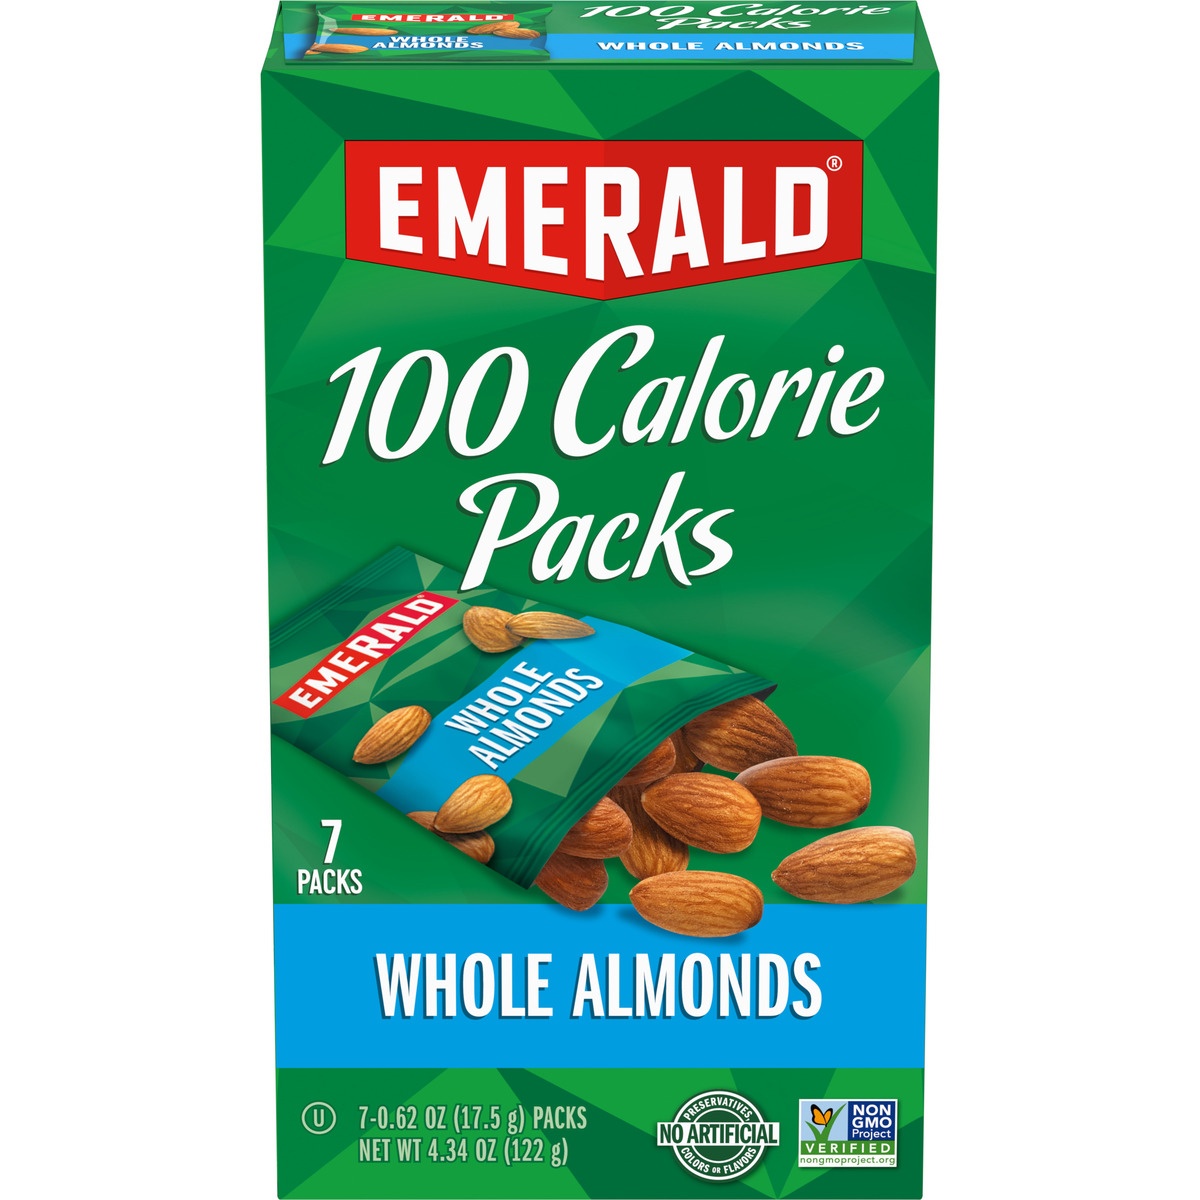 slide 1 of 11, Emerald Natural Almonds 100 Calorie Packs, 7 ct